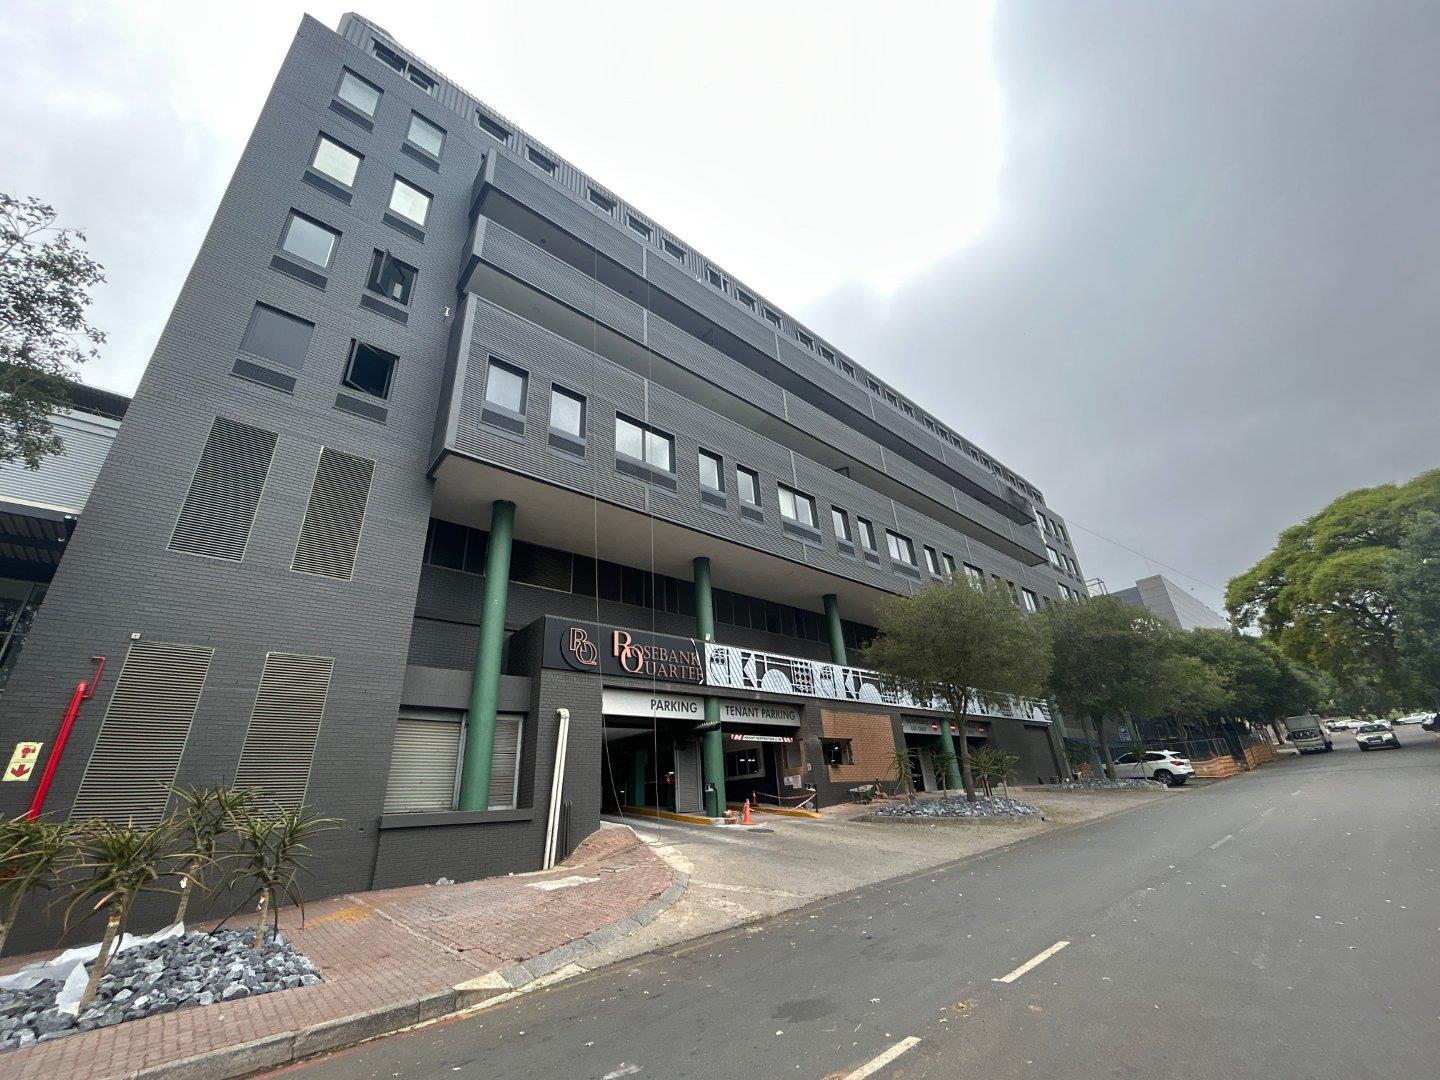 Commercial property to rent in Rosebank - 158 Jan Smuts Avenue - P24 ...